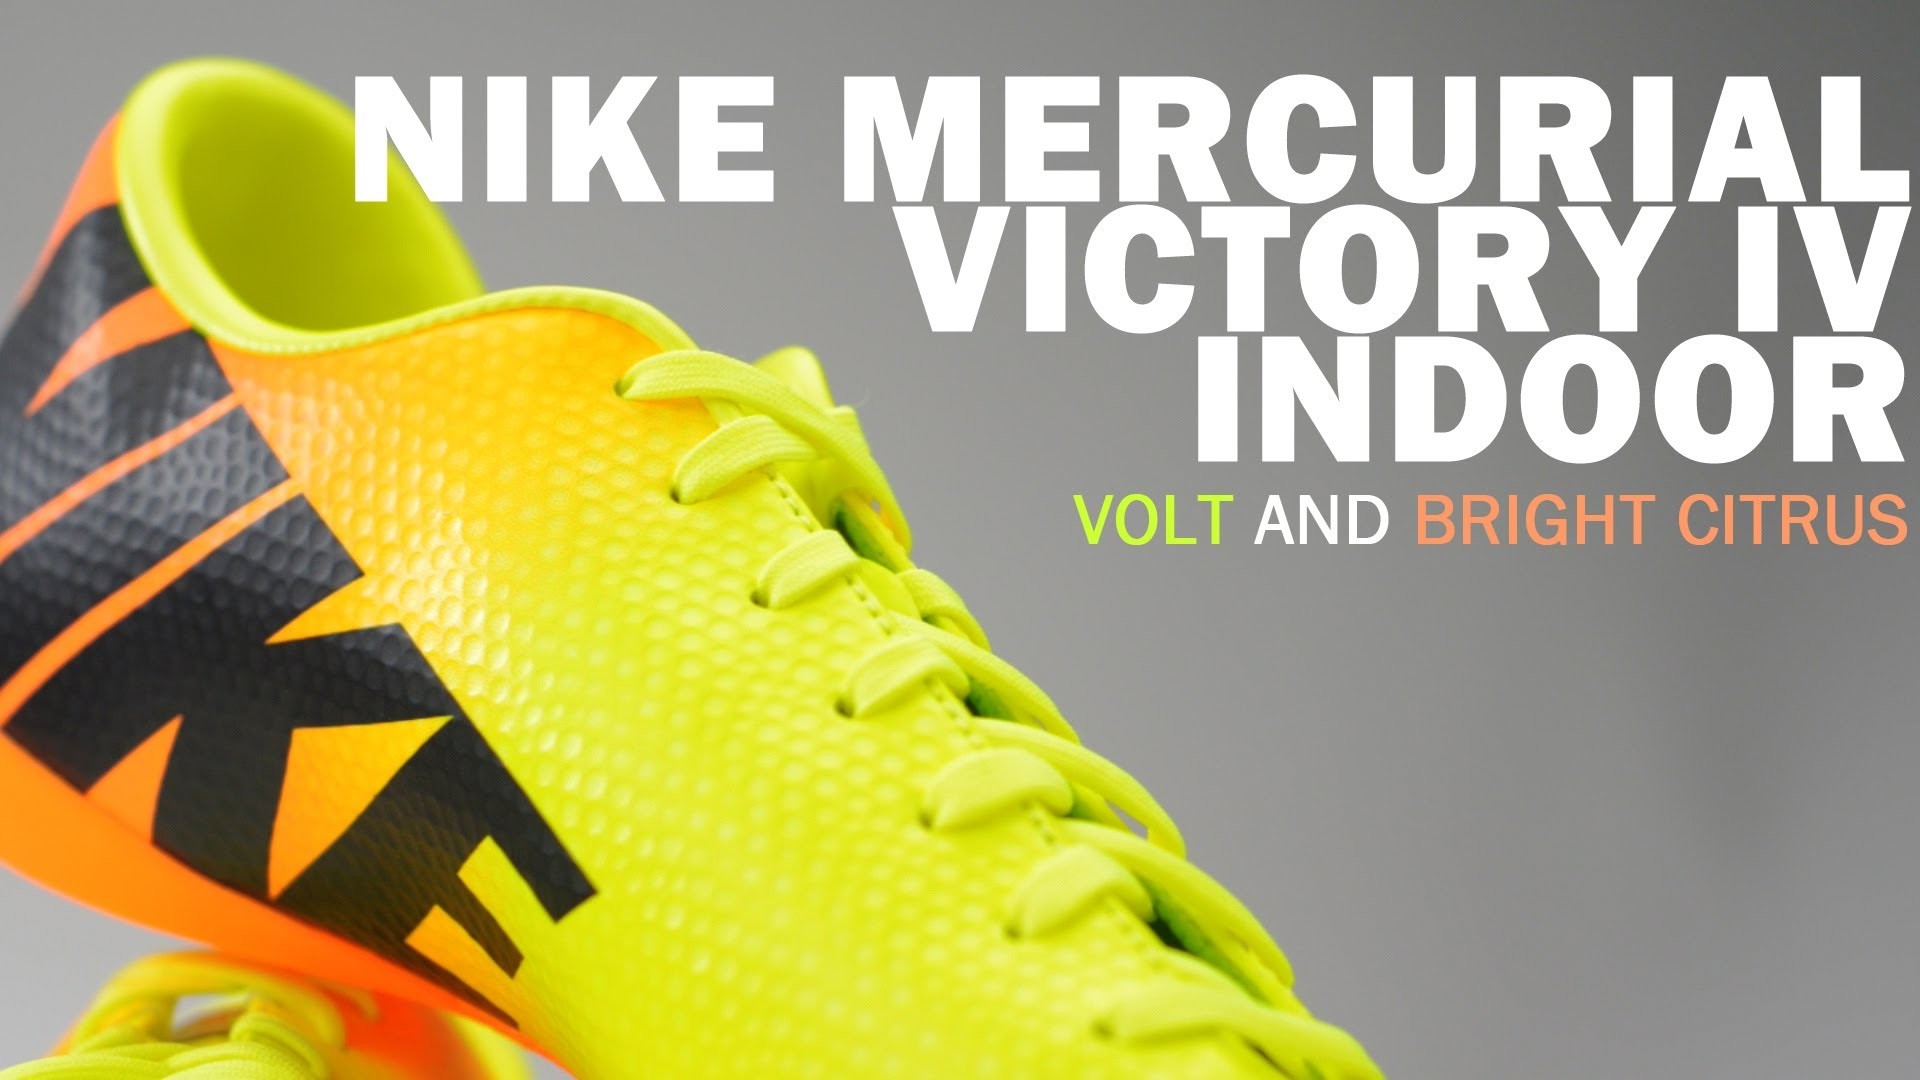 1920x1080 Nike Mercurial Victory IV Indoor Soccer Shoes - Volt and Bright Citrus  Unboxing - YouTube